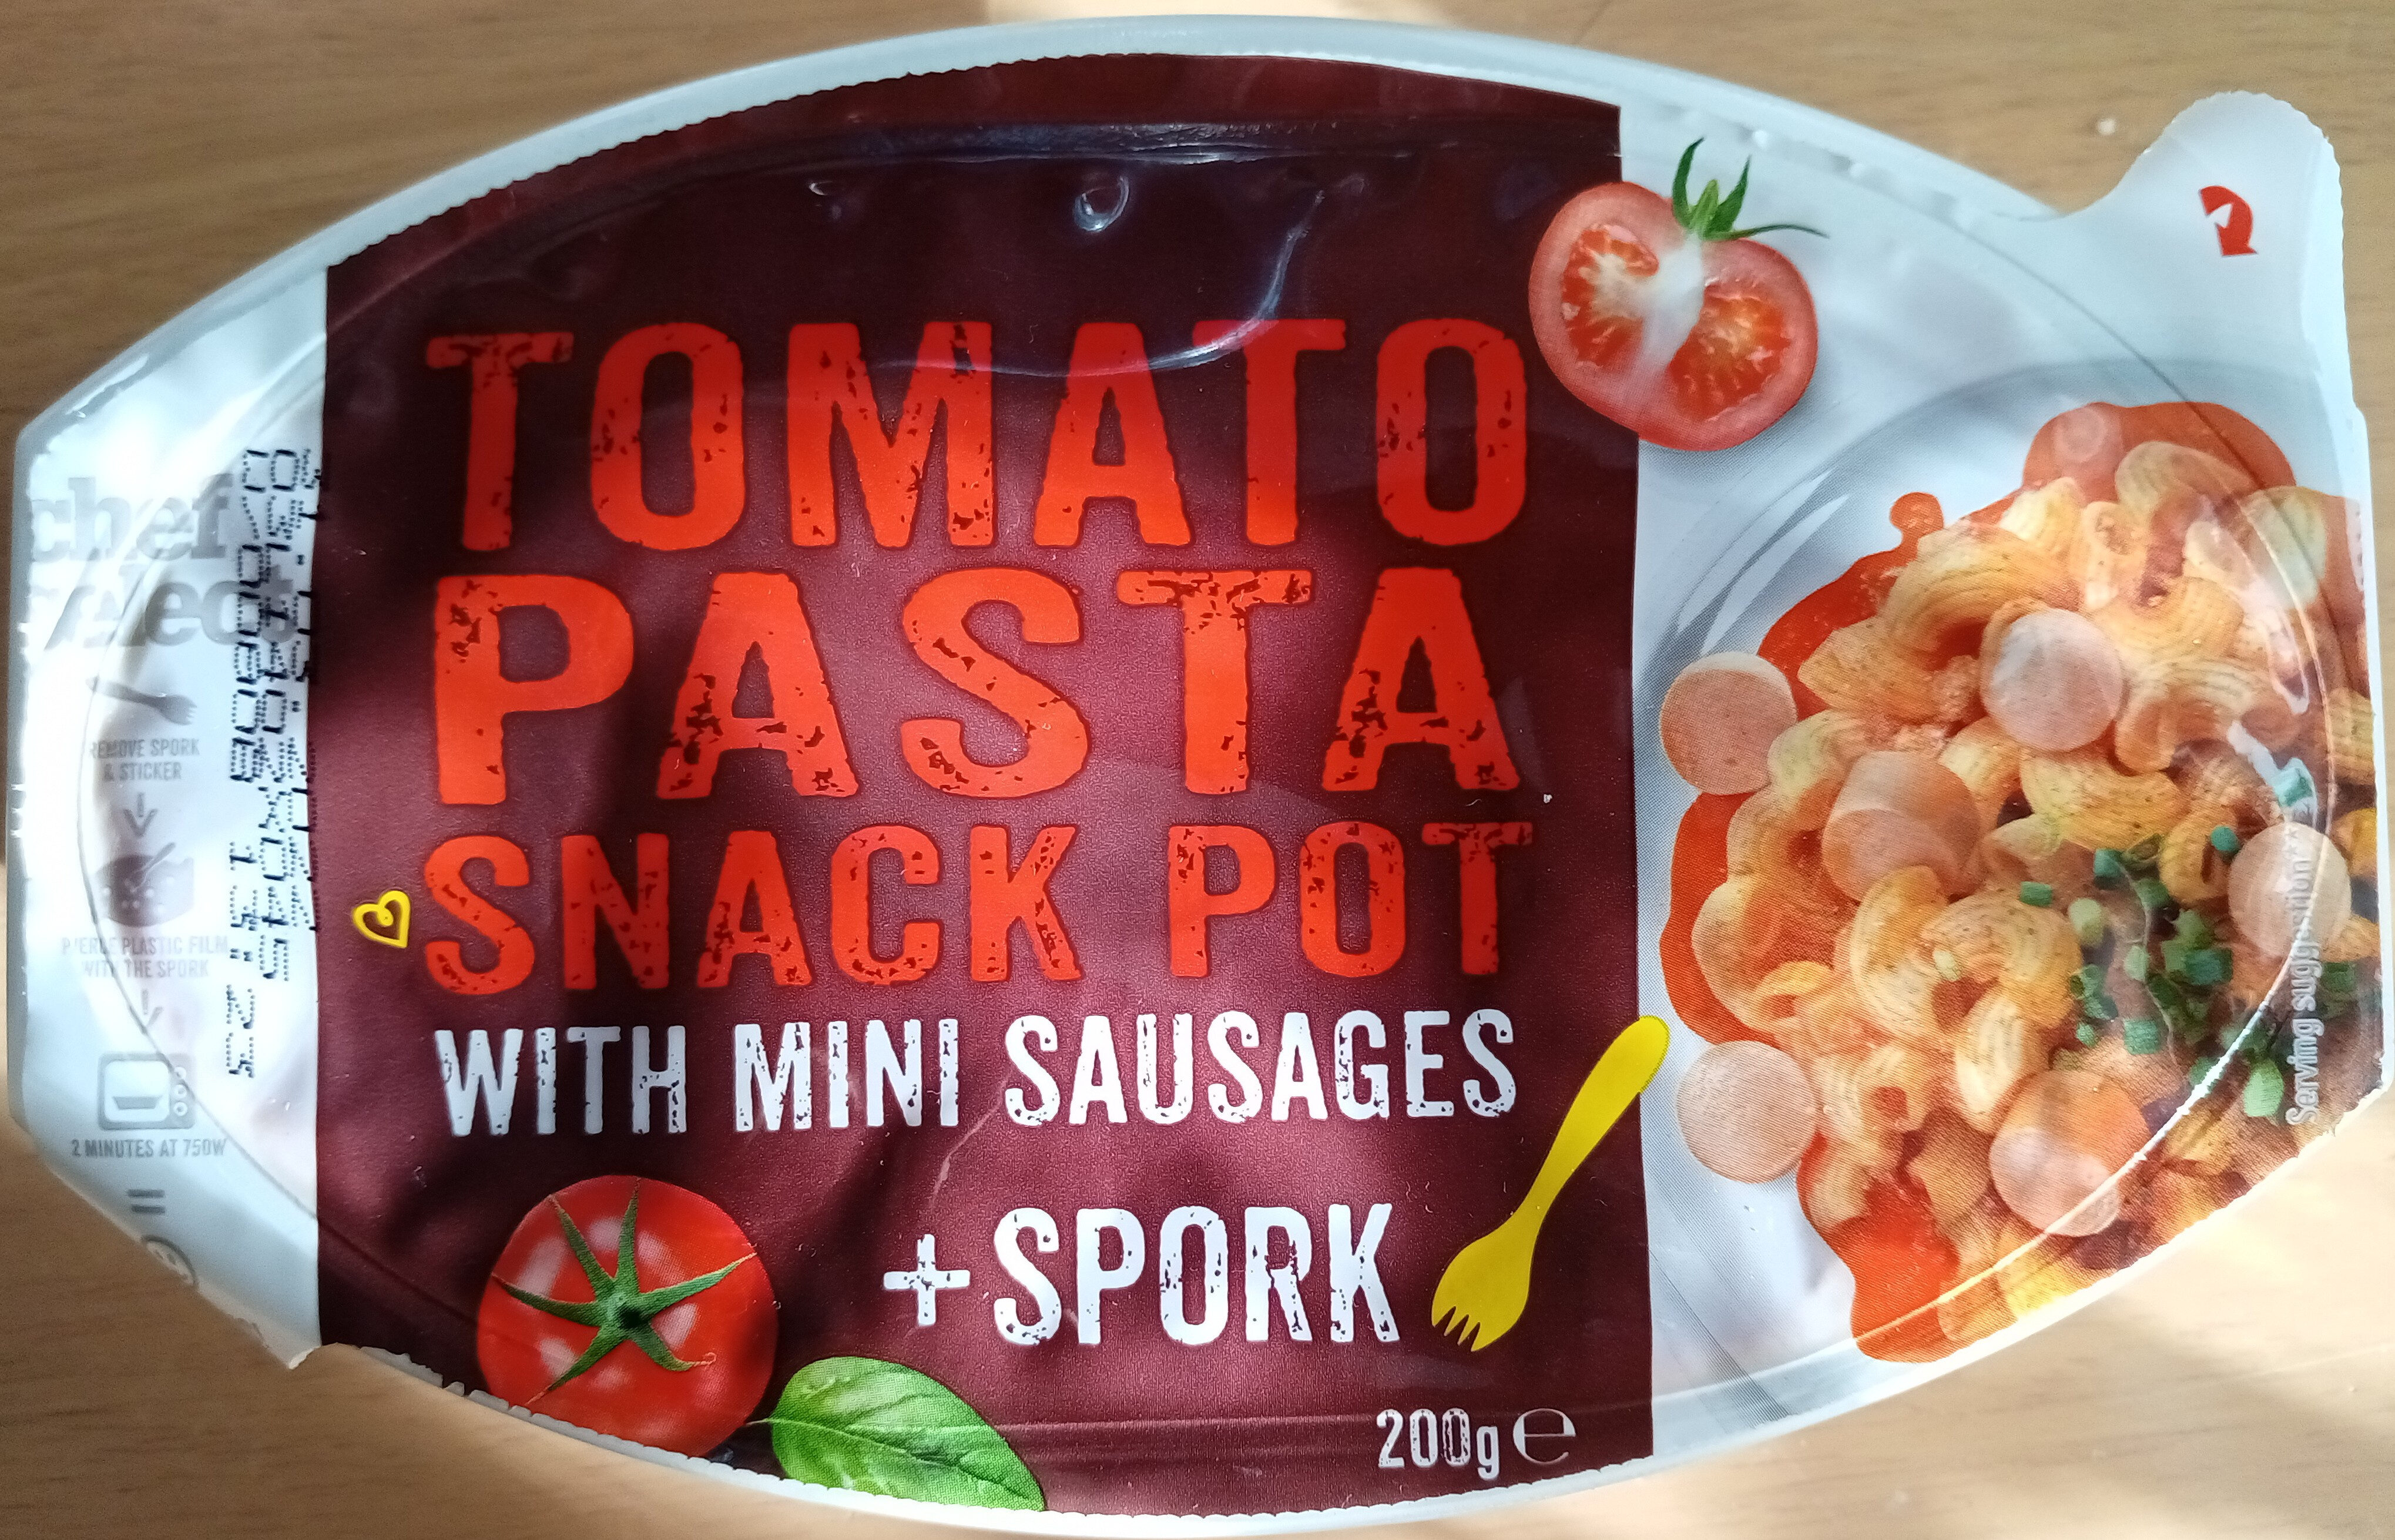 Chef Select Tomato Pasta Snack Pot with Mini Sausages + Spork - Produkt